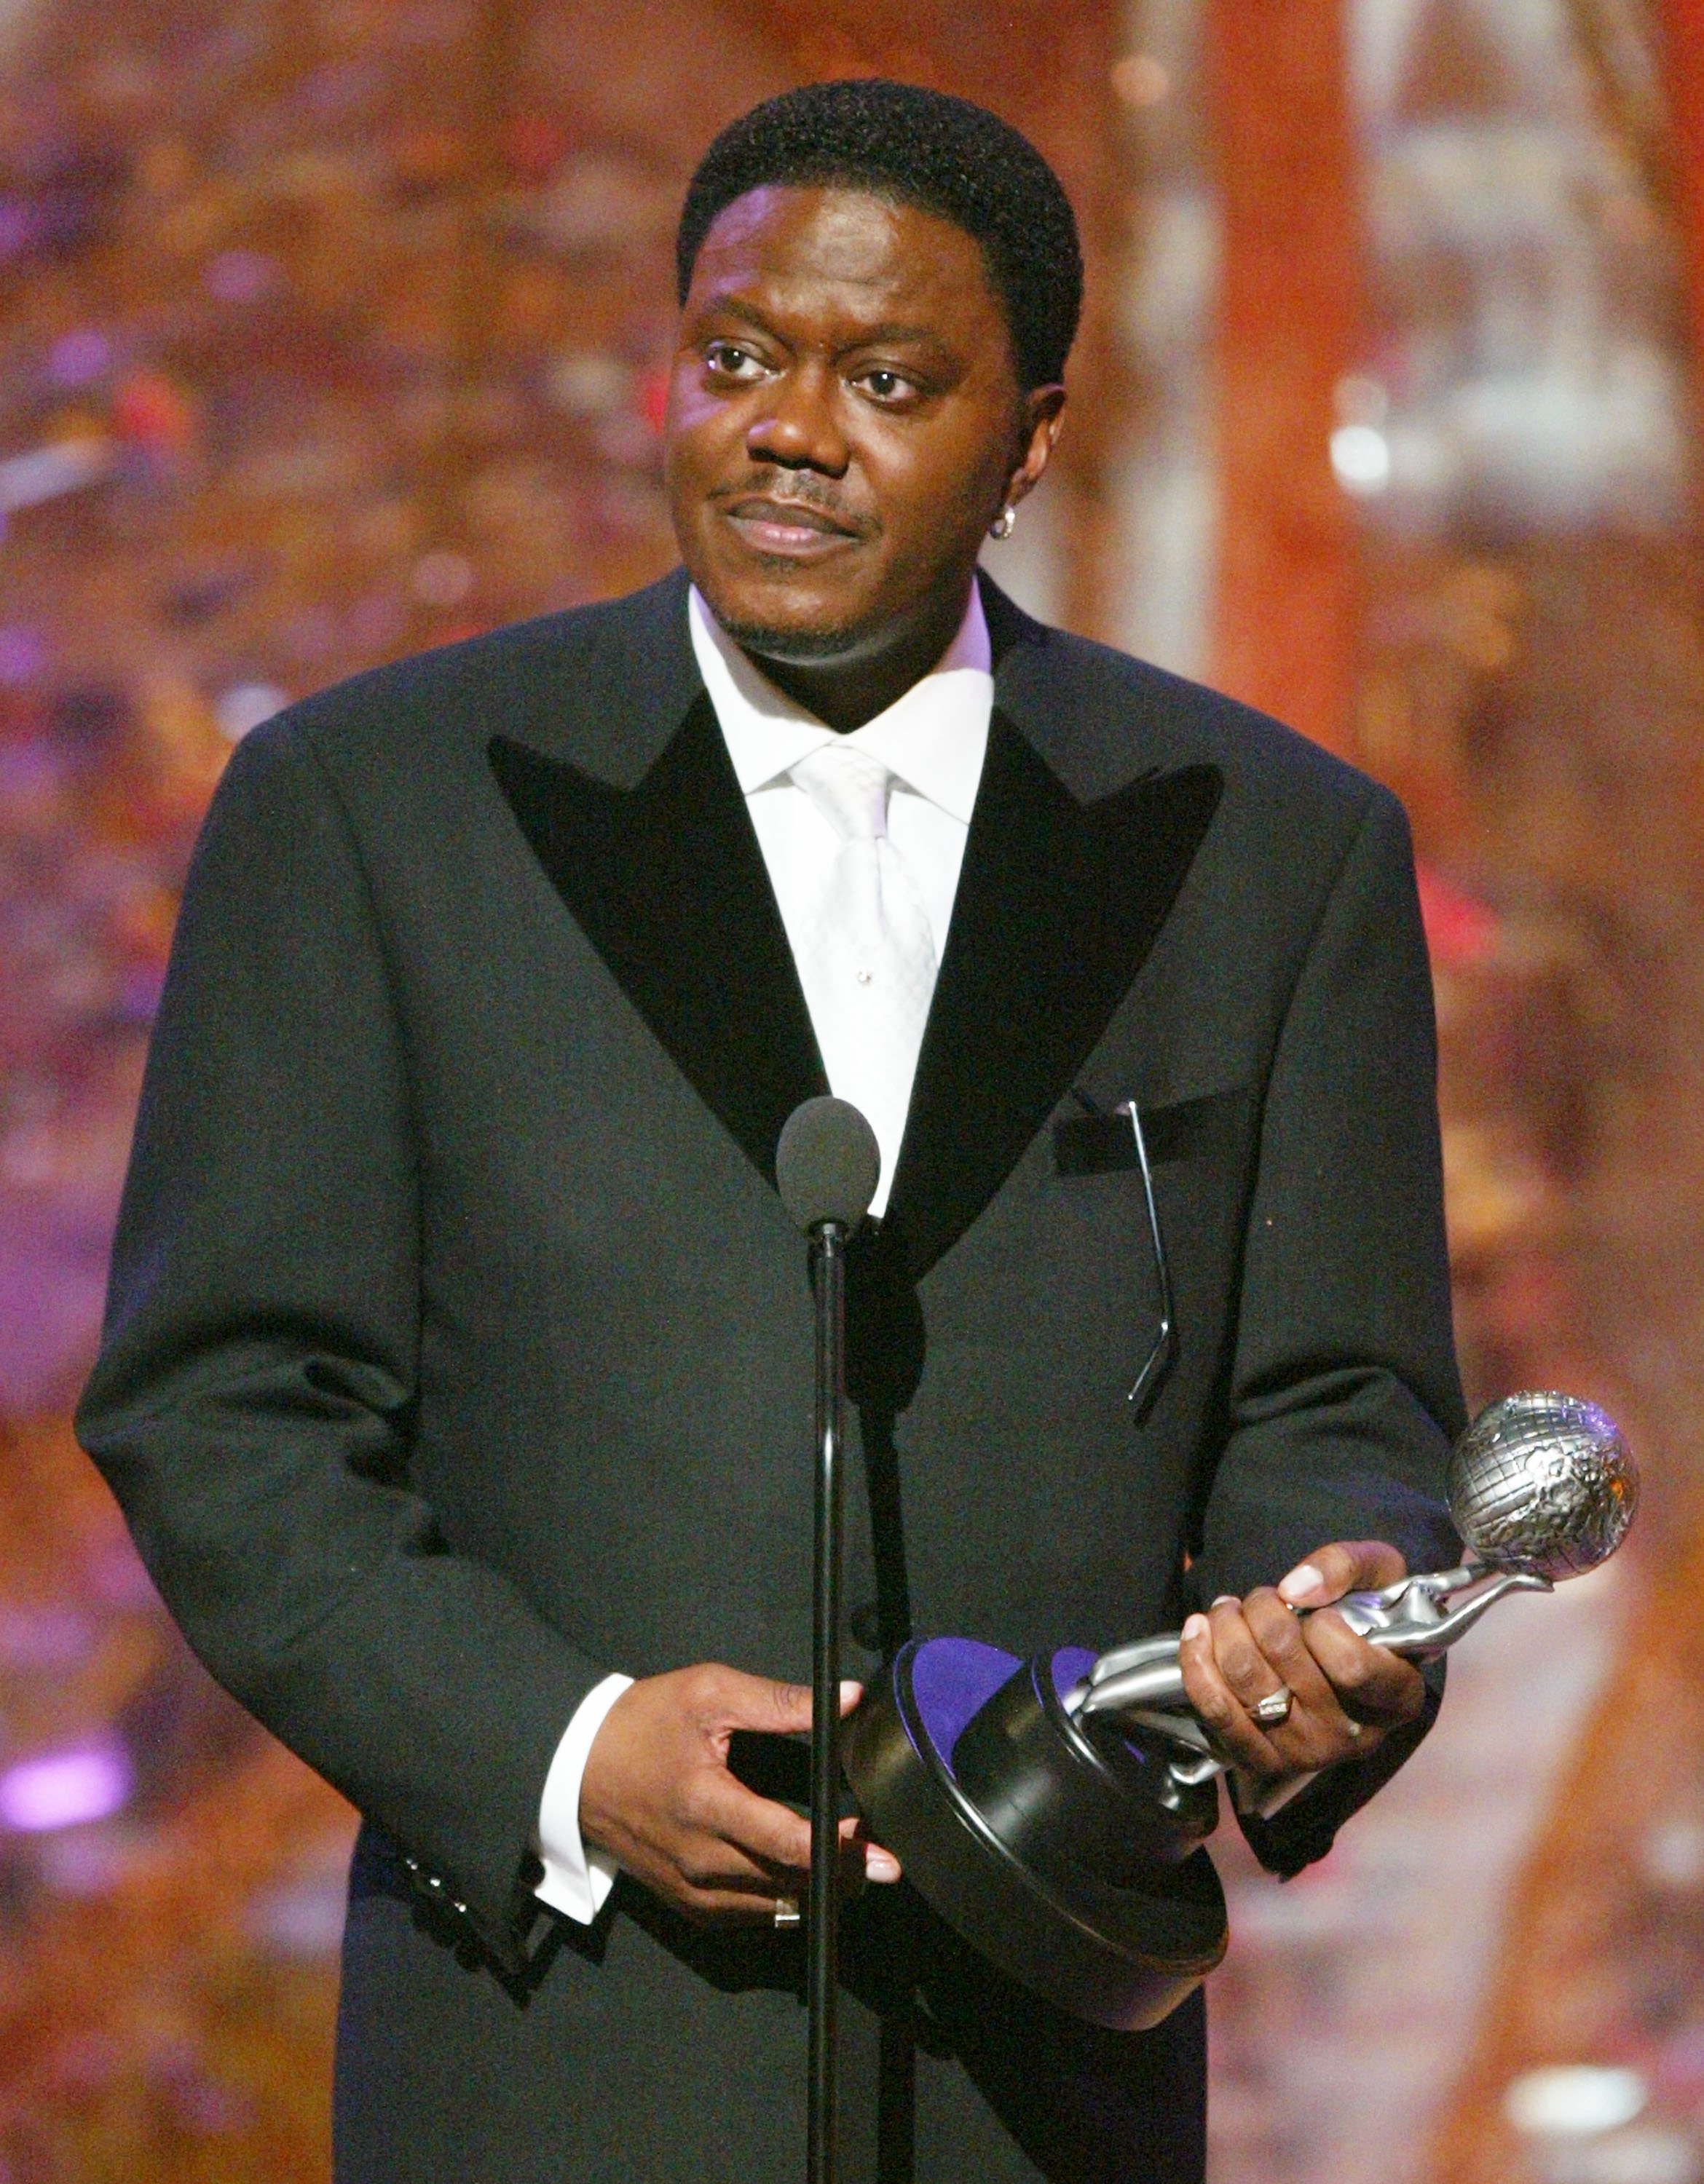 Bernie Mac accepting his award for Best Actor in a Comedy Series on stage at the 35th Annual NAACP Image Awards. | Source: Getty Images